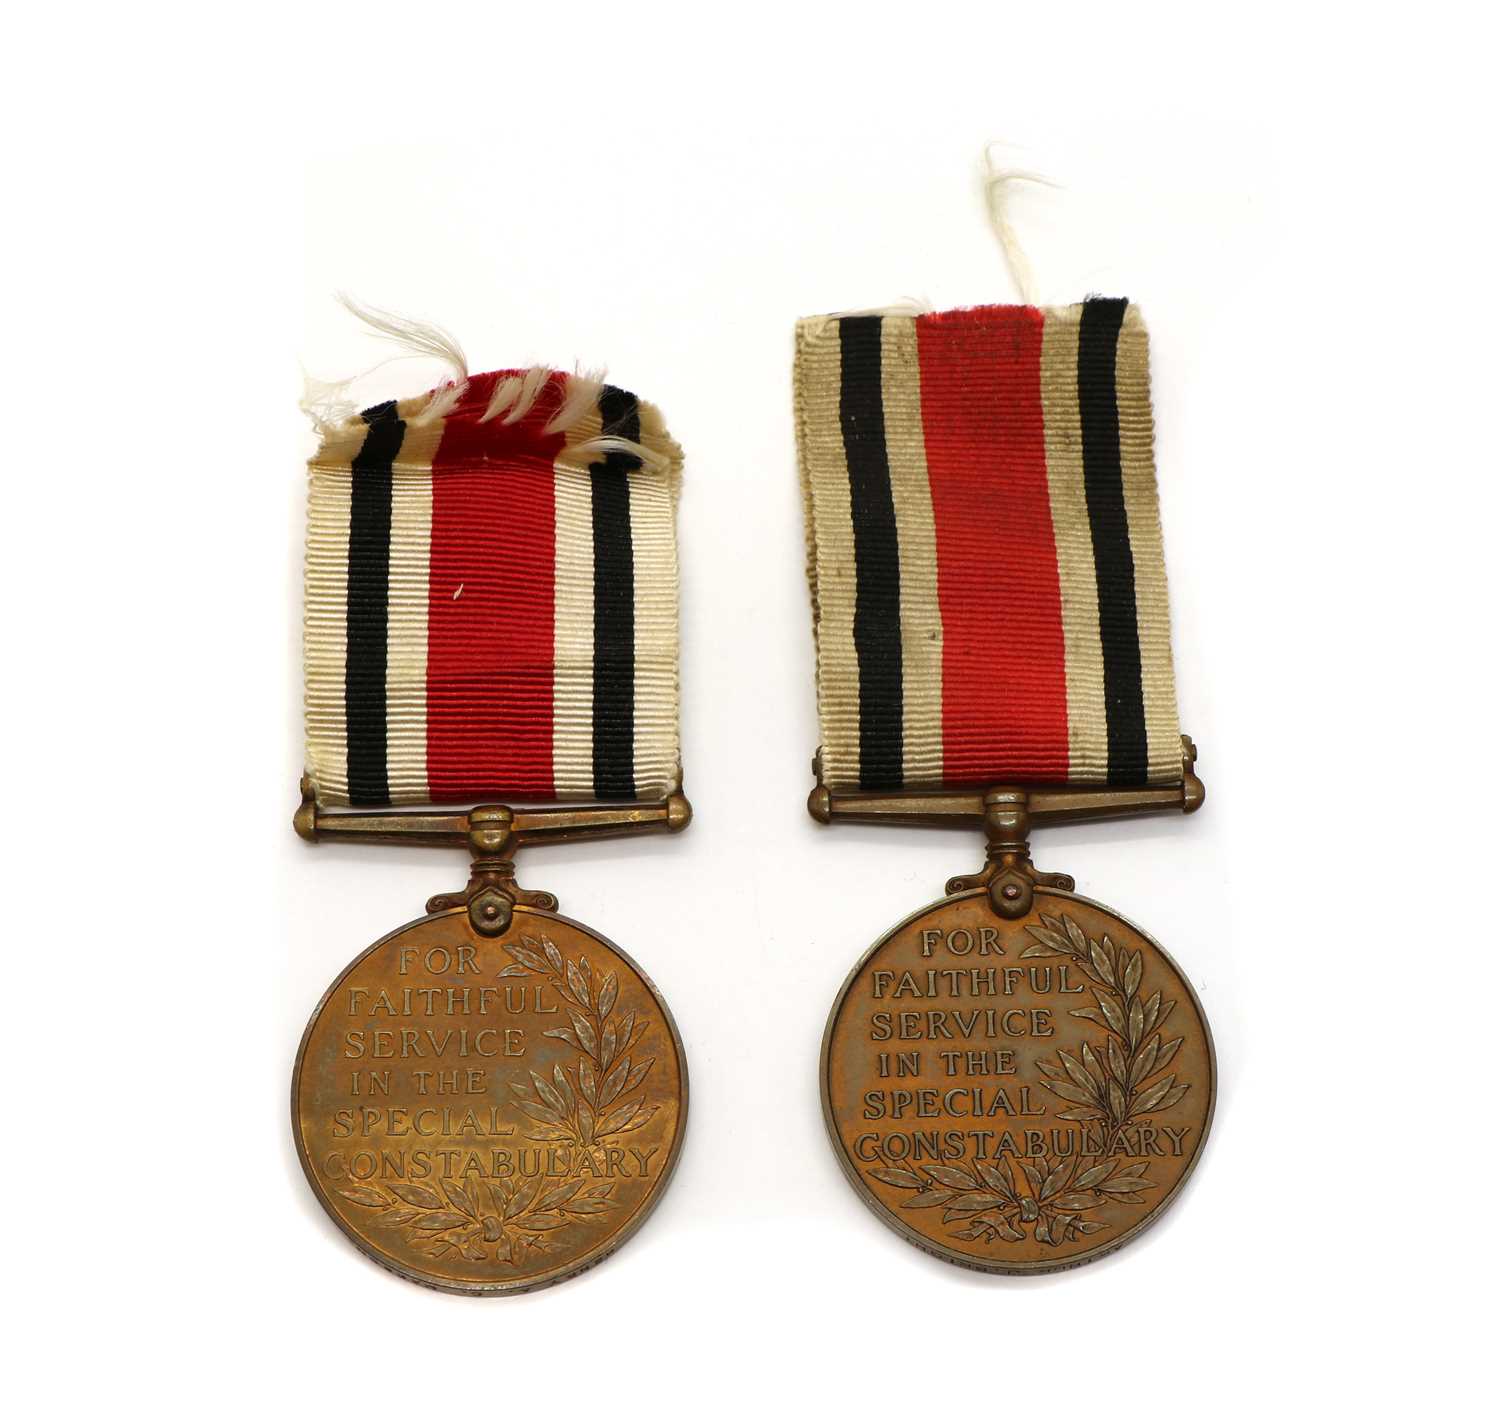 Lot 51 - Two Special Constabulary Long Service Medals